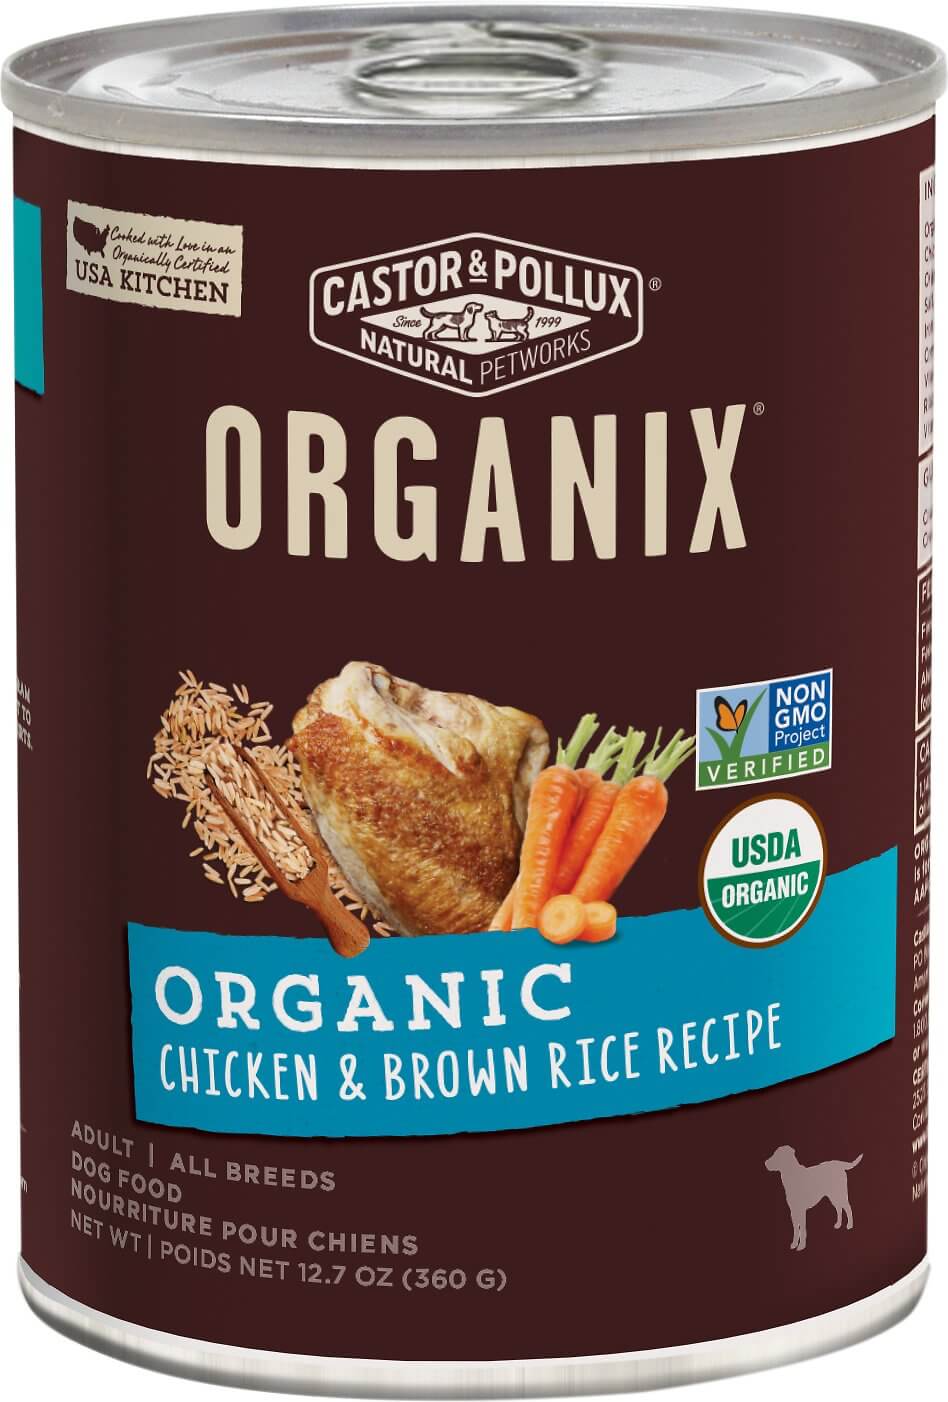 Organix Canned Dog Food Review Rating Recalls